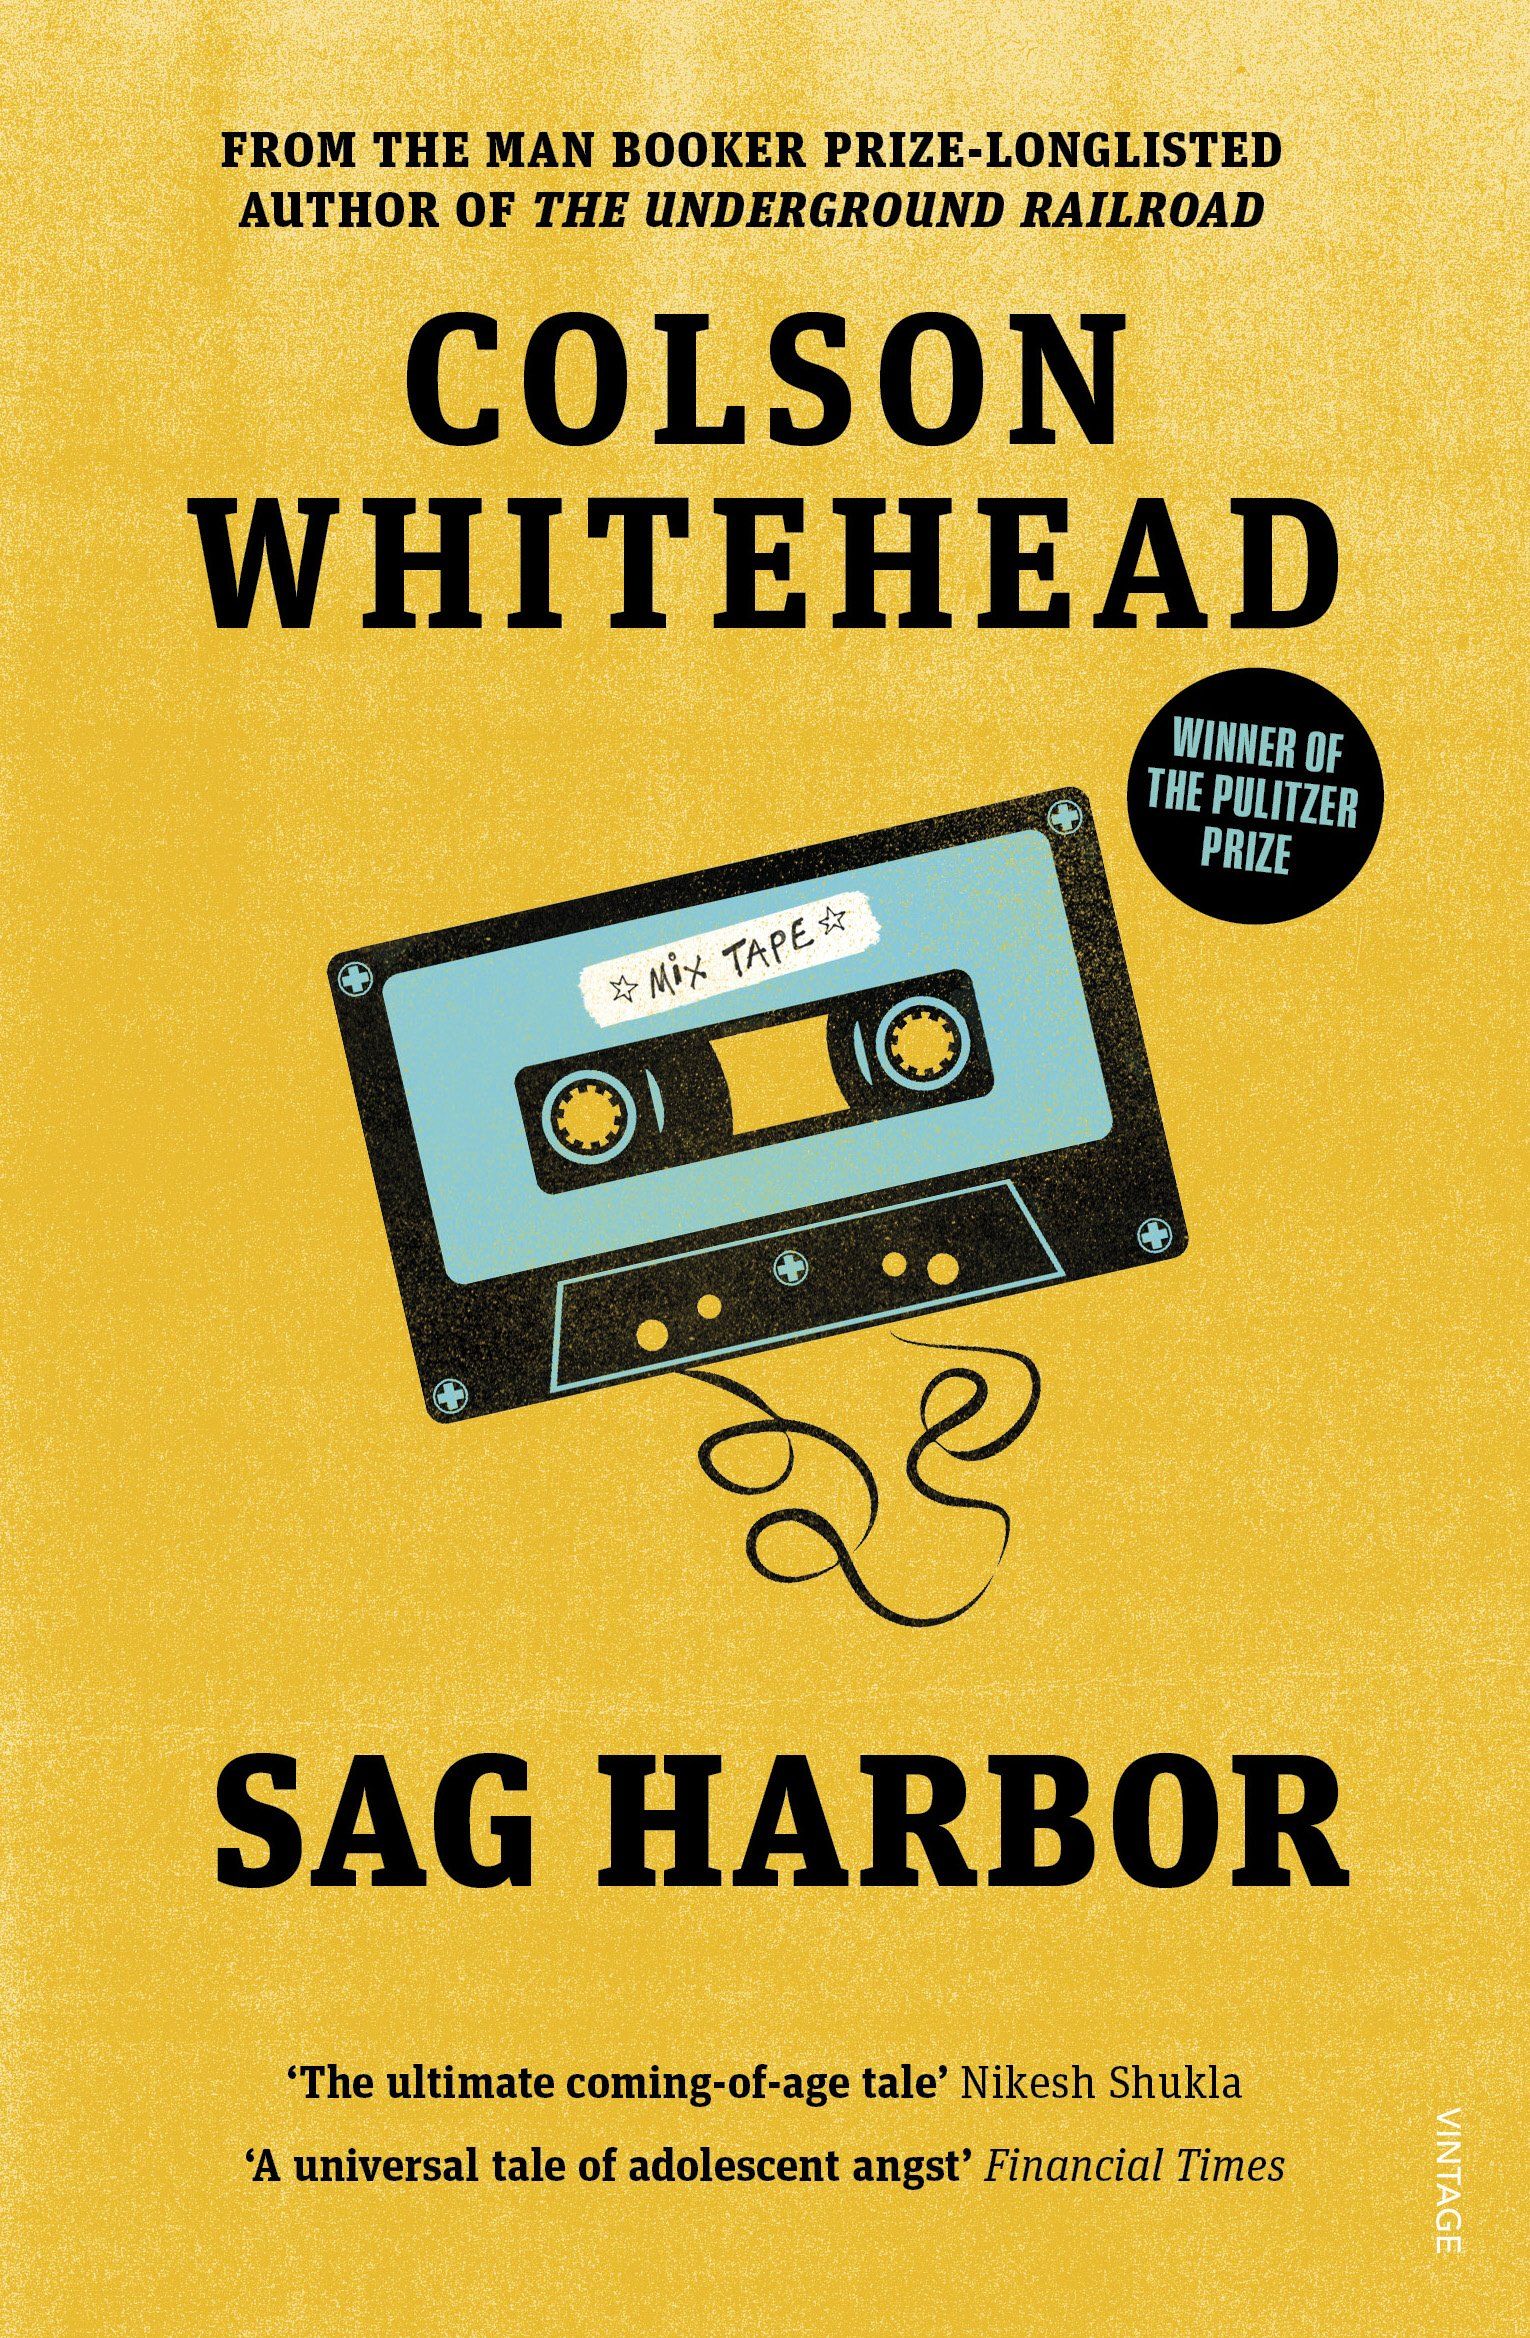 Book cover of Sag Harbor by Colson Whitehead